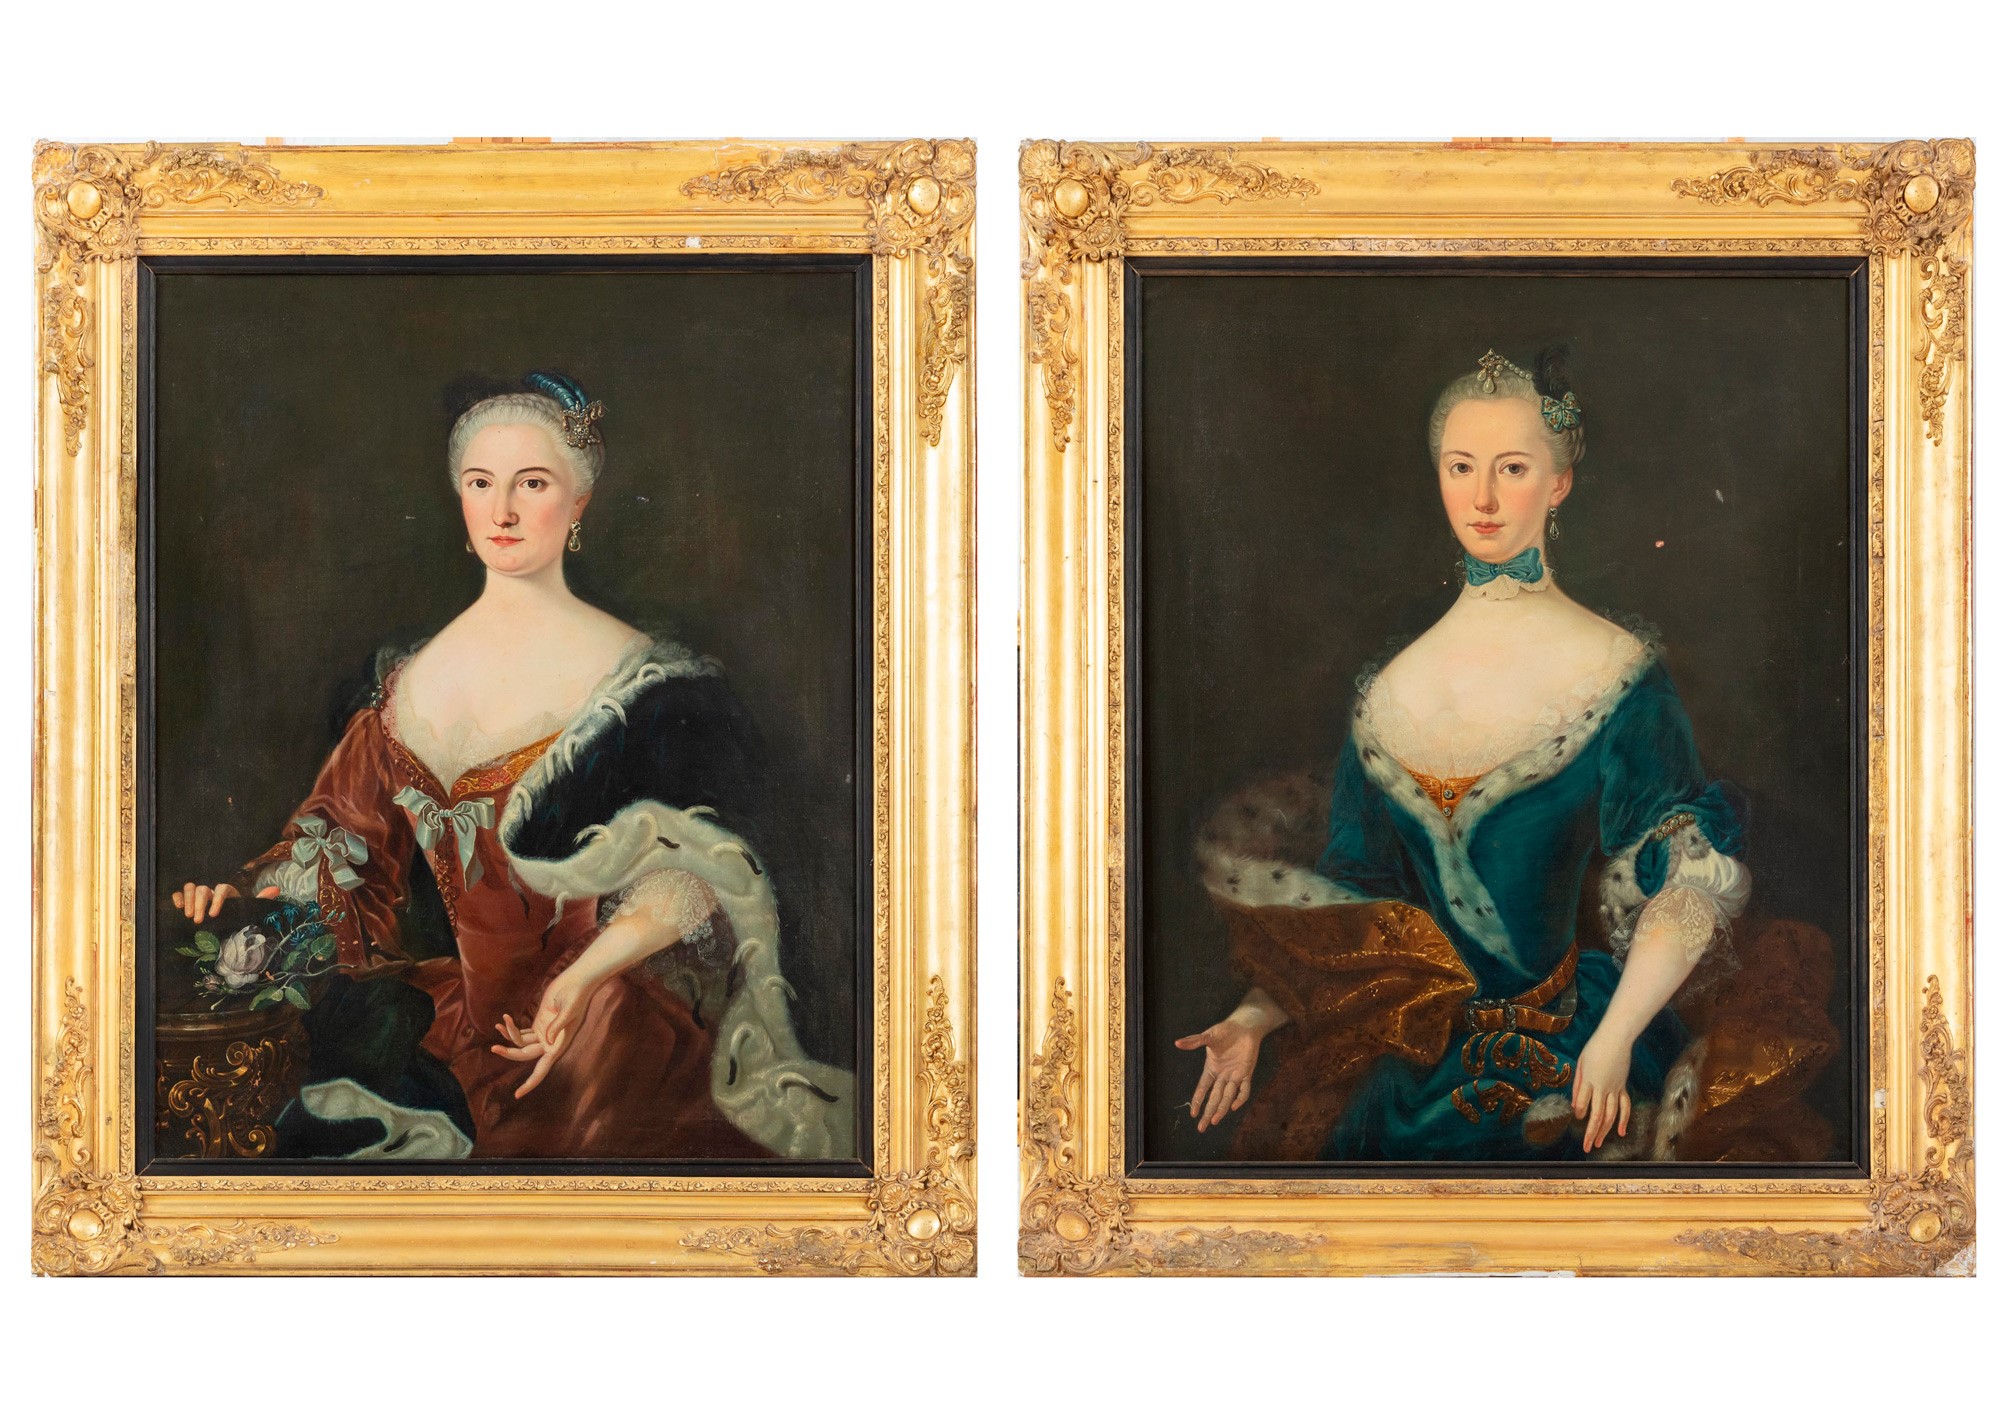 Pair of portraits of noblewomen school francese, 19th century, oil painting on canvasframed, one